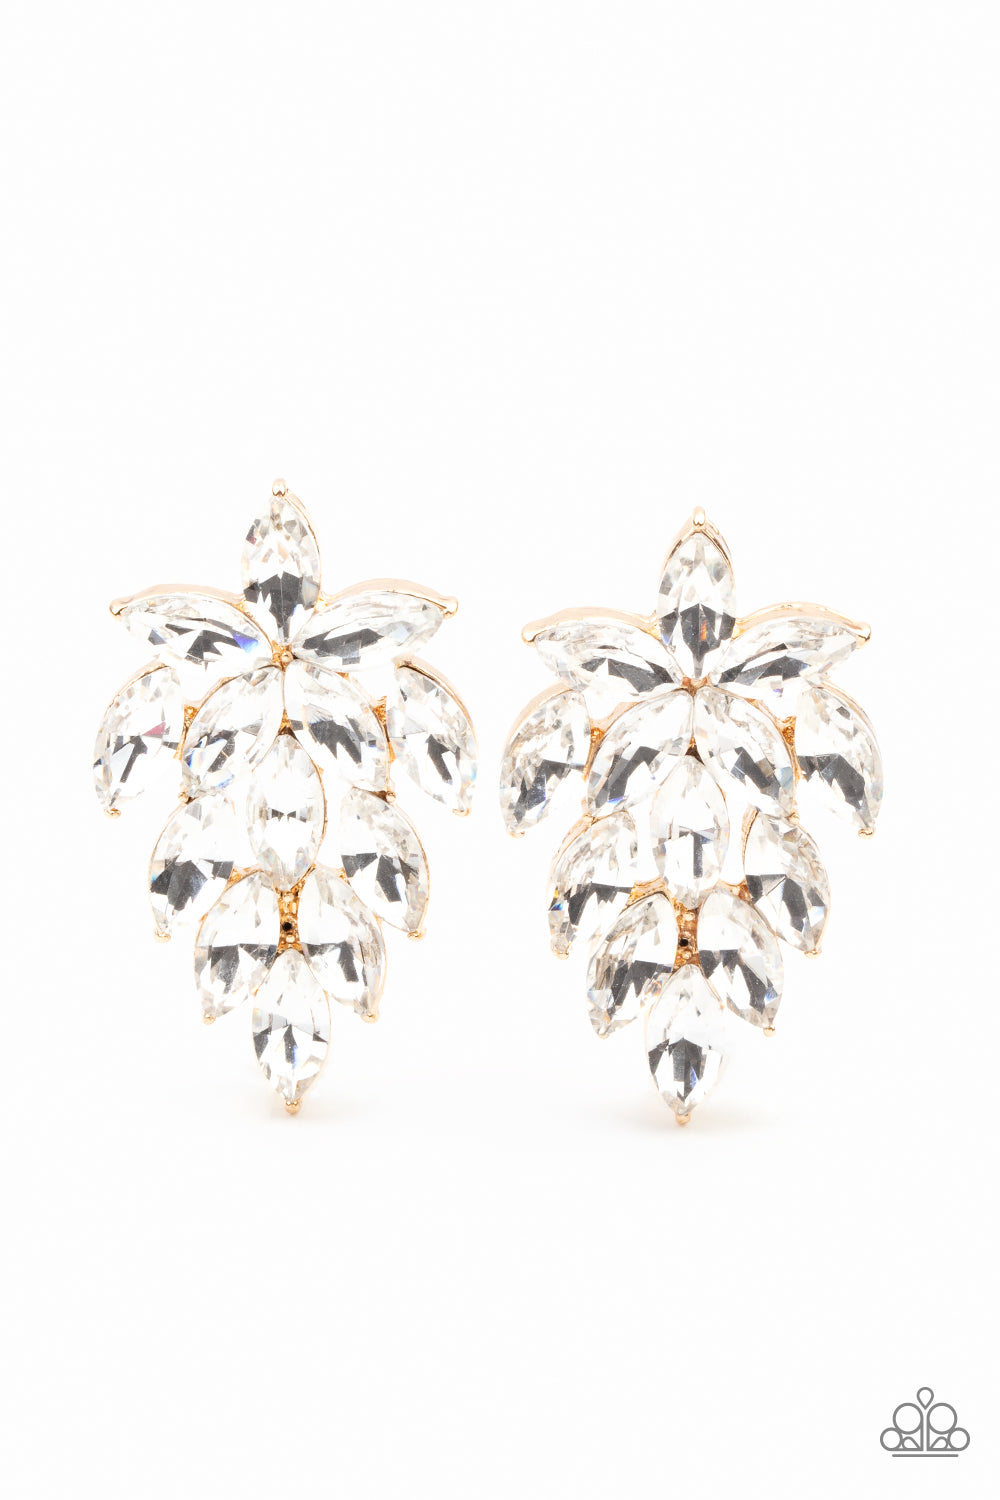 Bling earrings, featuring dainty gold studded accents, a sparkly collection of marquise cut white rhinestones flare.